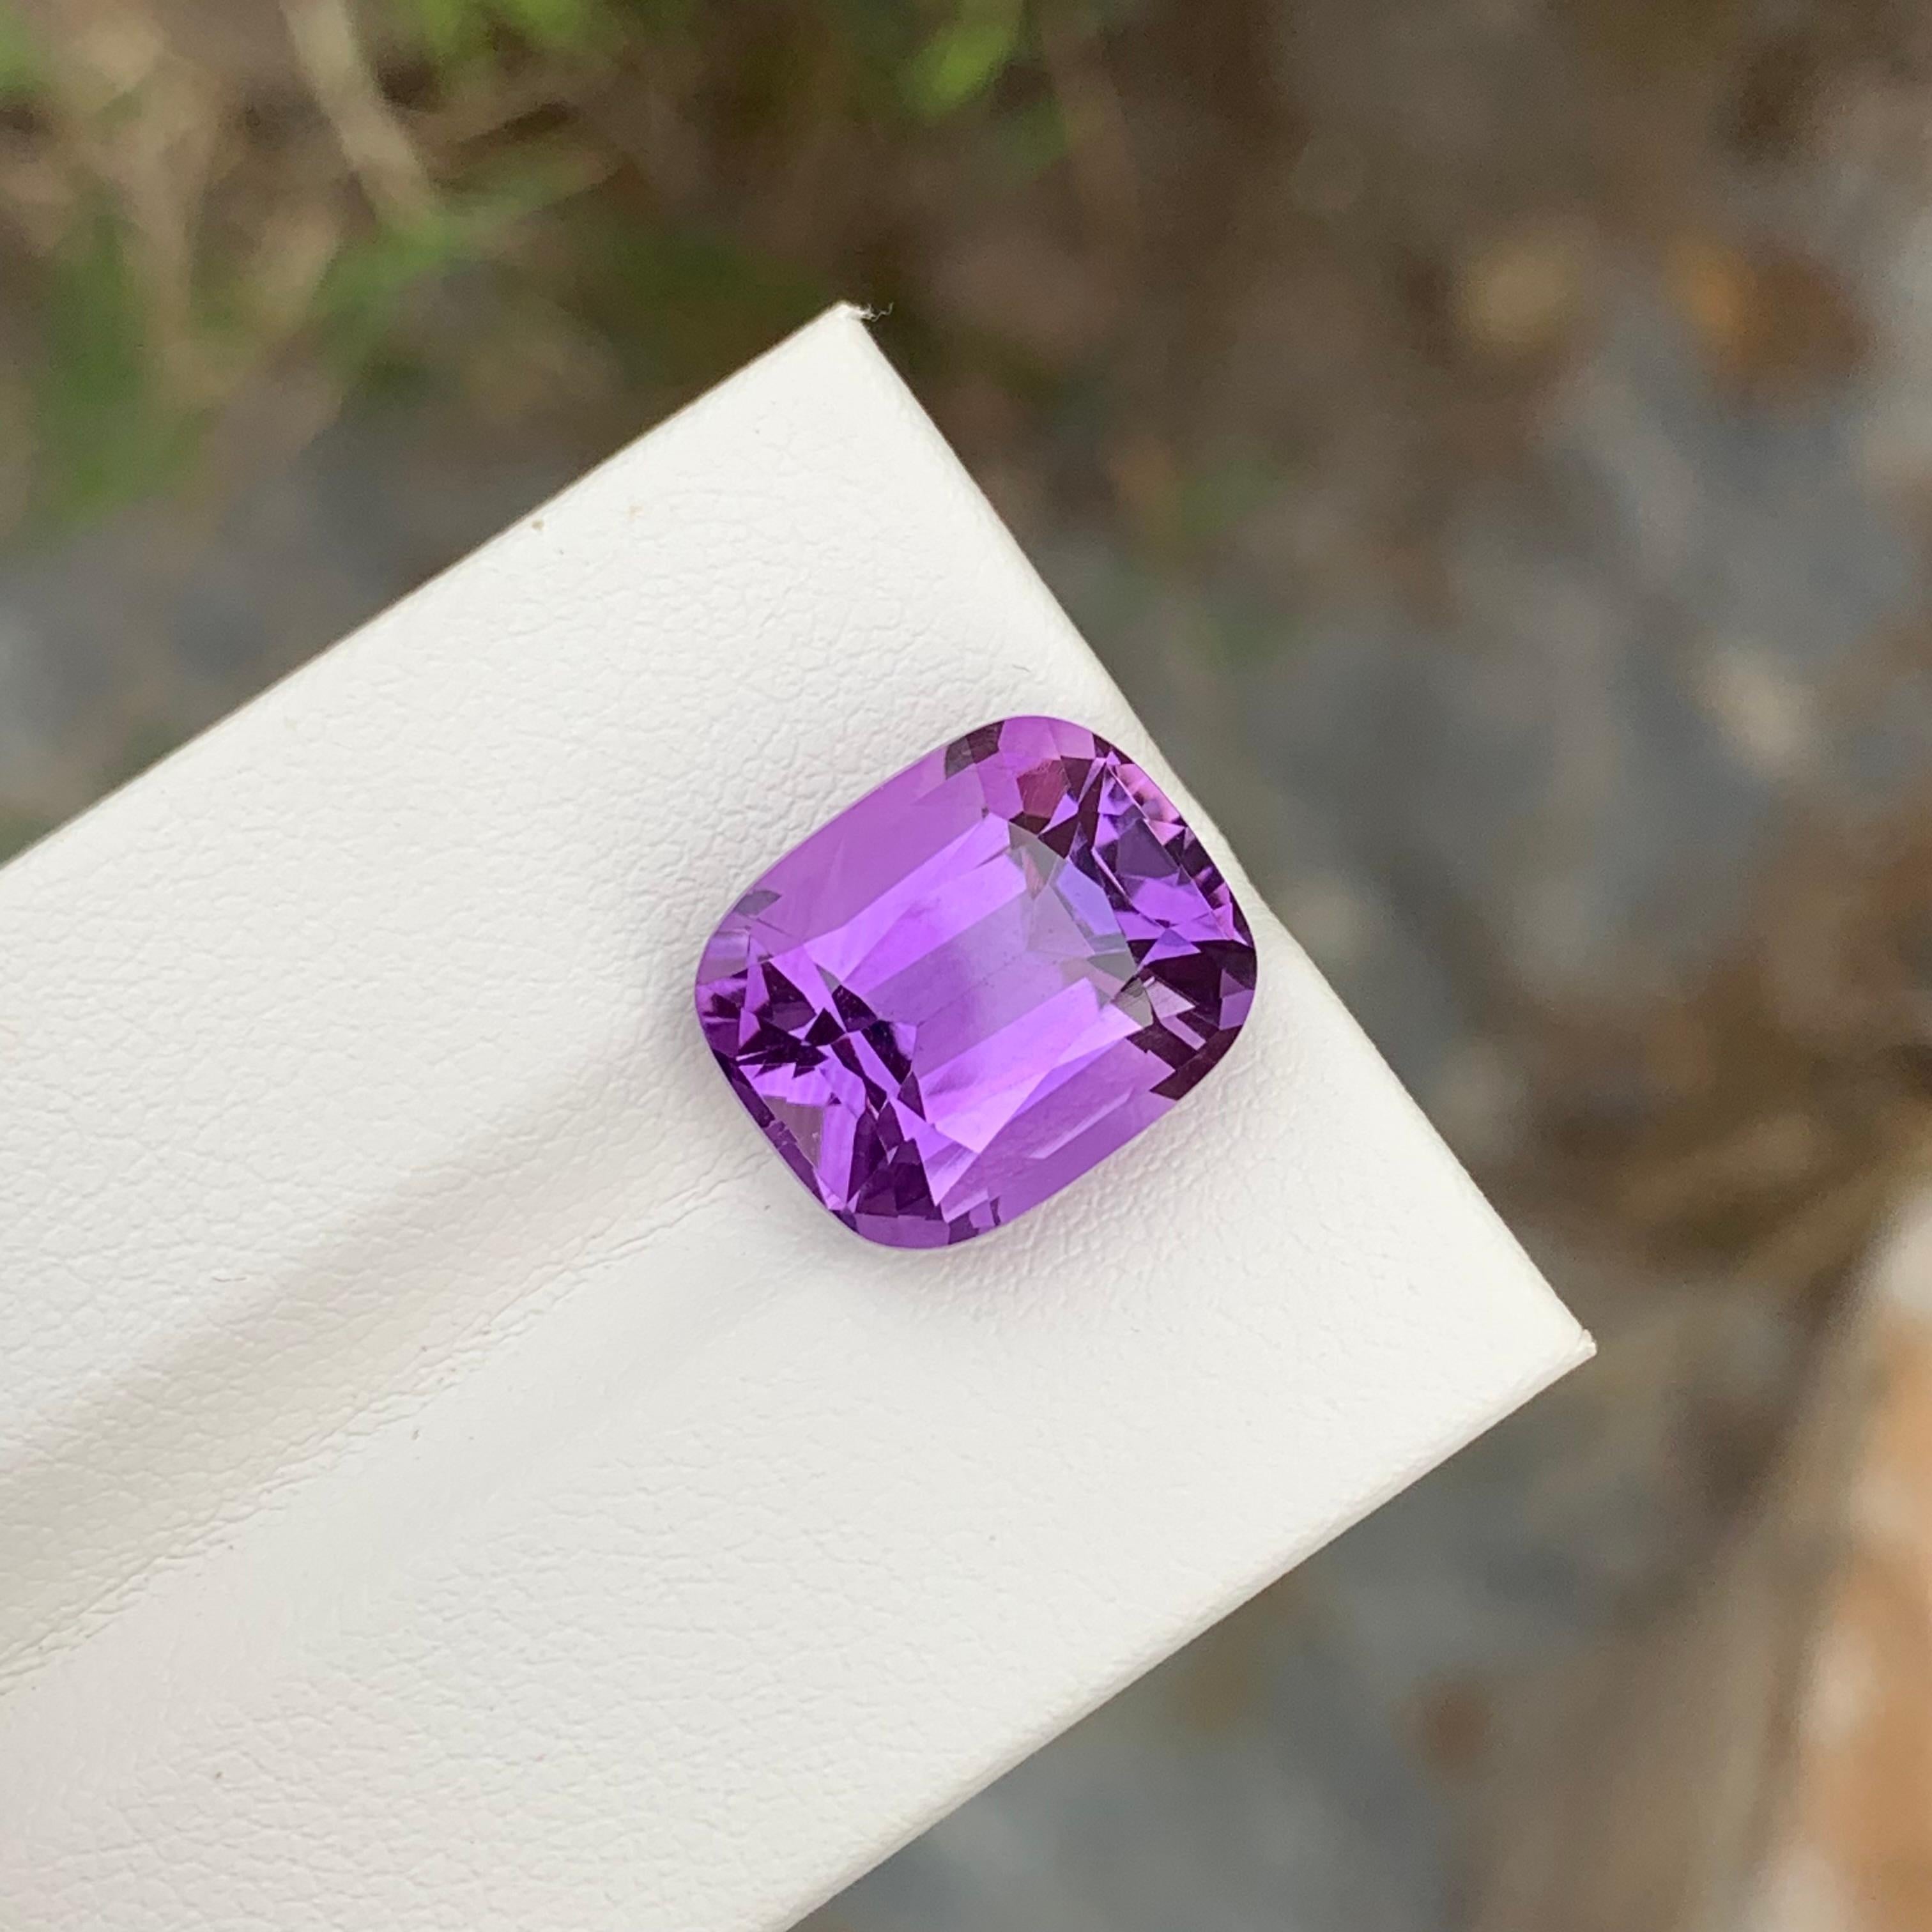 Loose Amethyst
Weight: 8.25 Carats
Dimension: 13.4 x 11.1 x 8.6 Mm
Colour: Purple
Origin: Brazil
Treatment: Non
Certificate: On Demand
Shape: Cushion 

Amethyst, a stunning variety of quartz known for its mesmerizing purple hue, has captivated